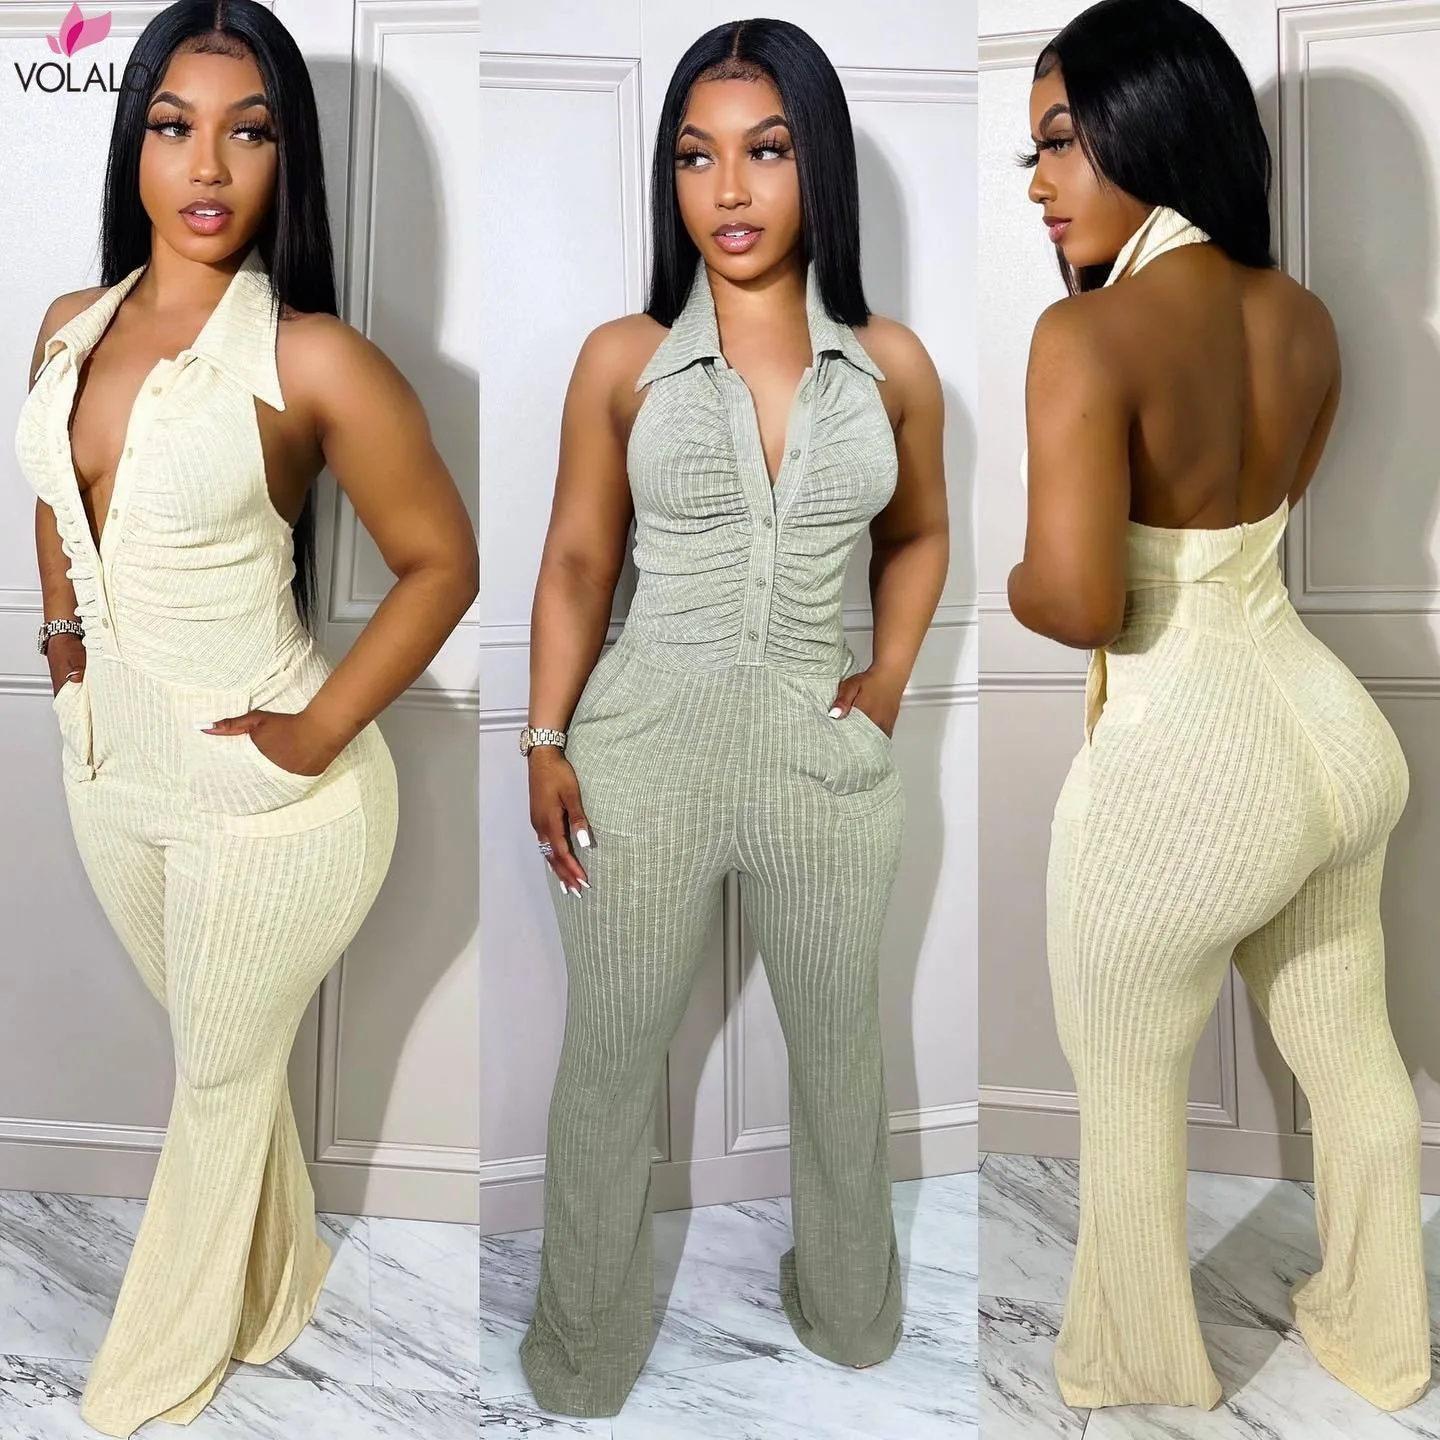 

VOLALO Turn Down Collar Halter Sexy Jumpsuit Pocket Knitted Ribbed Backless Skinny Bodycon Rompers Clubwear Outfits Overalls